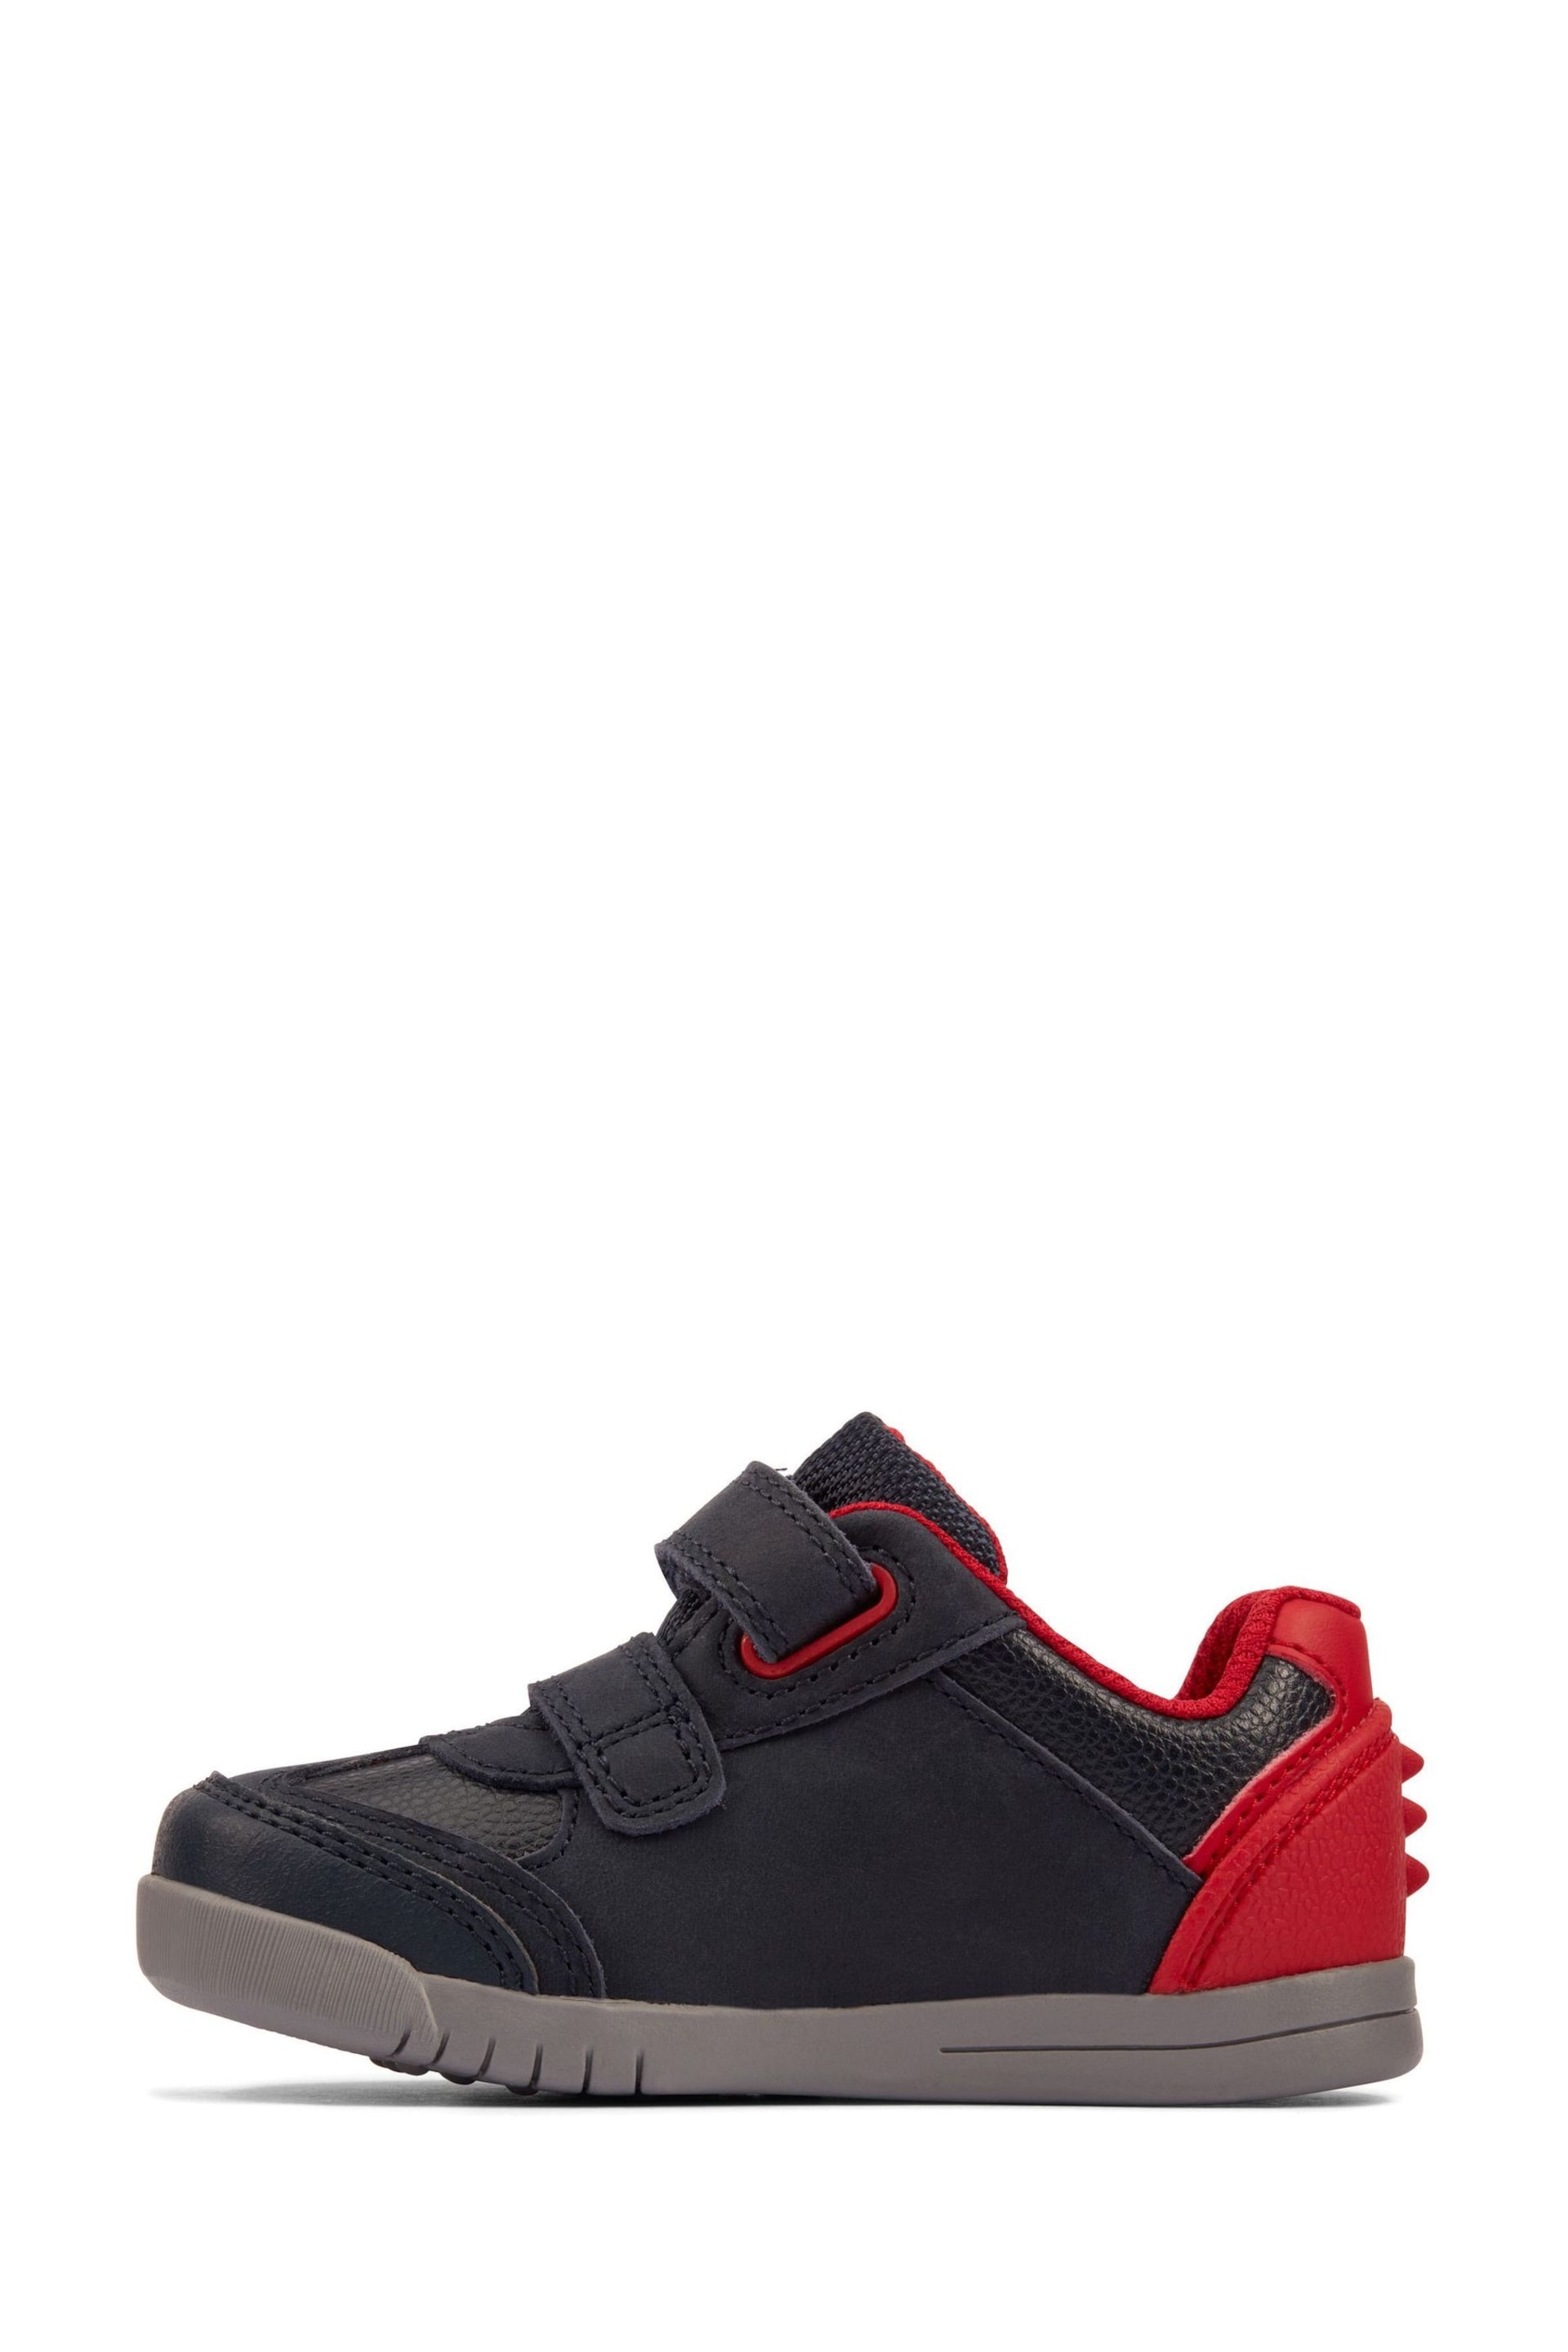 Clarks Navy Blue/Red Multi Fit Leather Dinosaur Trainers - Image 2 of 7